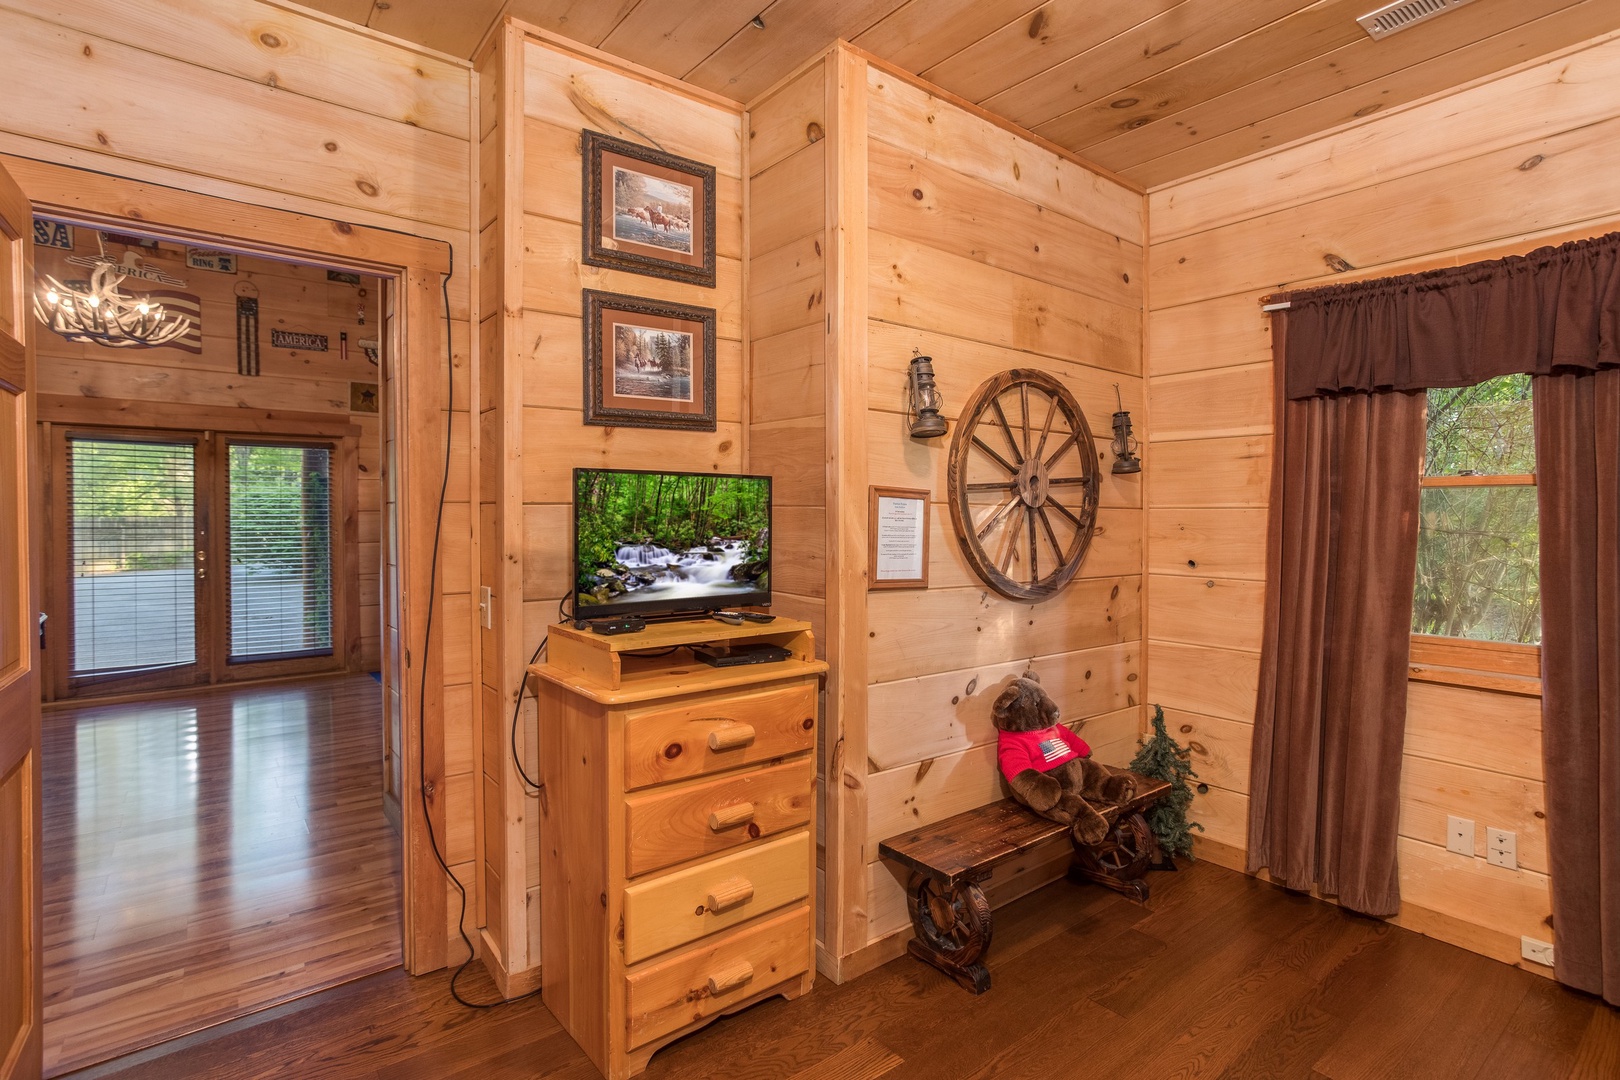 Dresser and TV in the bunk room at Patriot Pointe, a 5 bedroom cabin rental located in Pigeon Forge